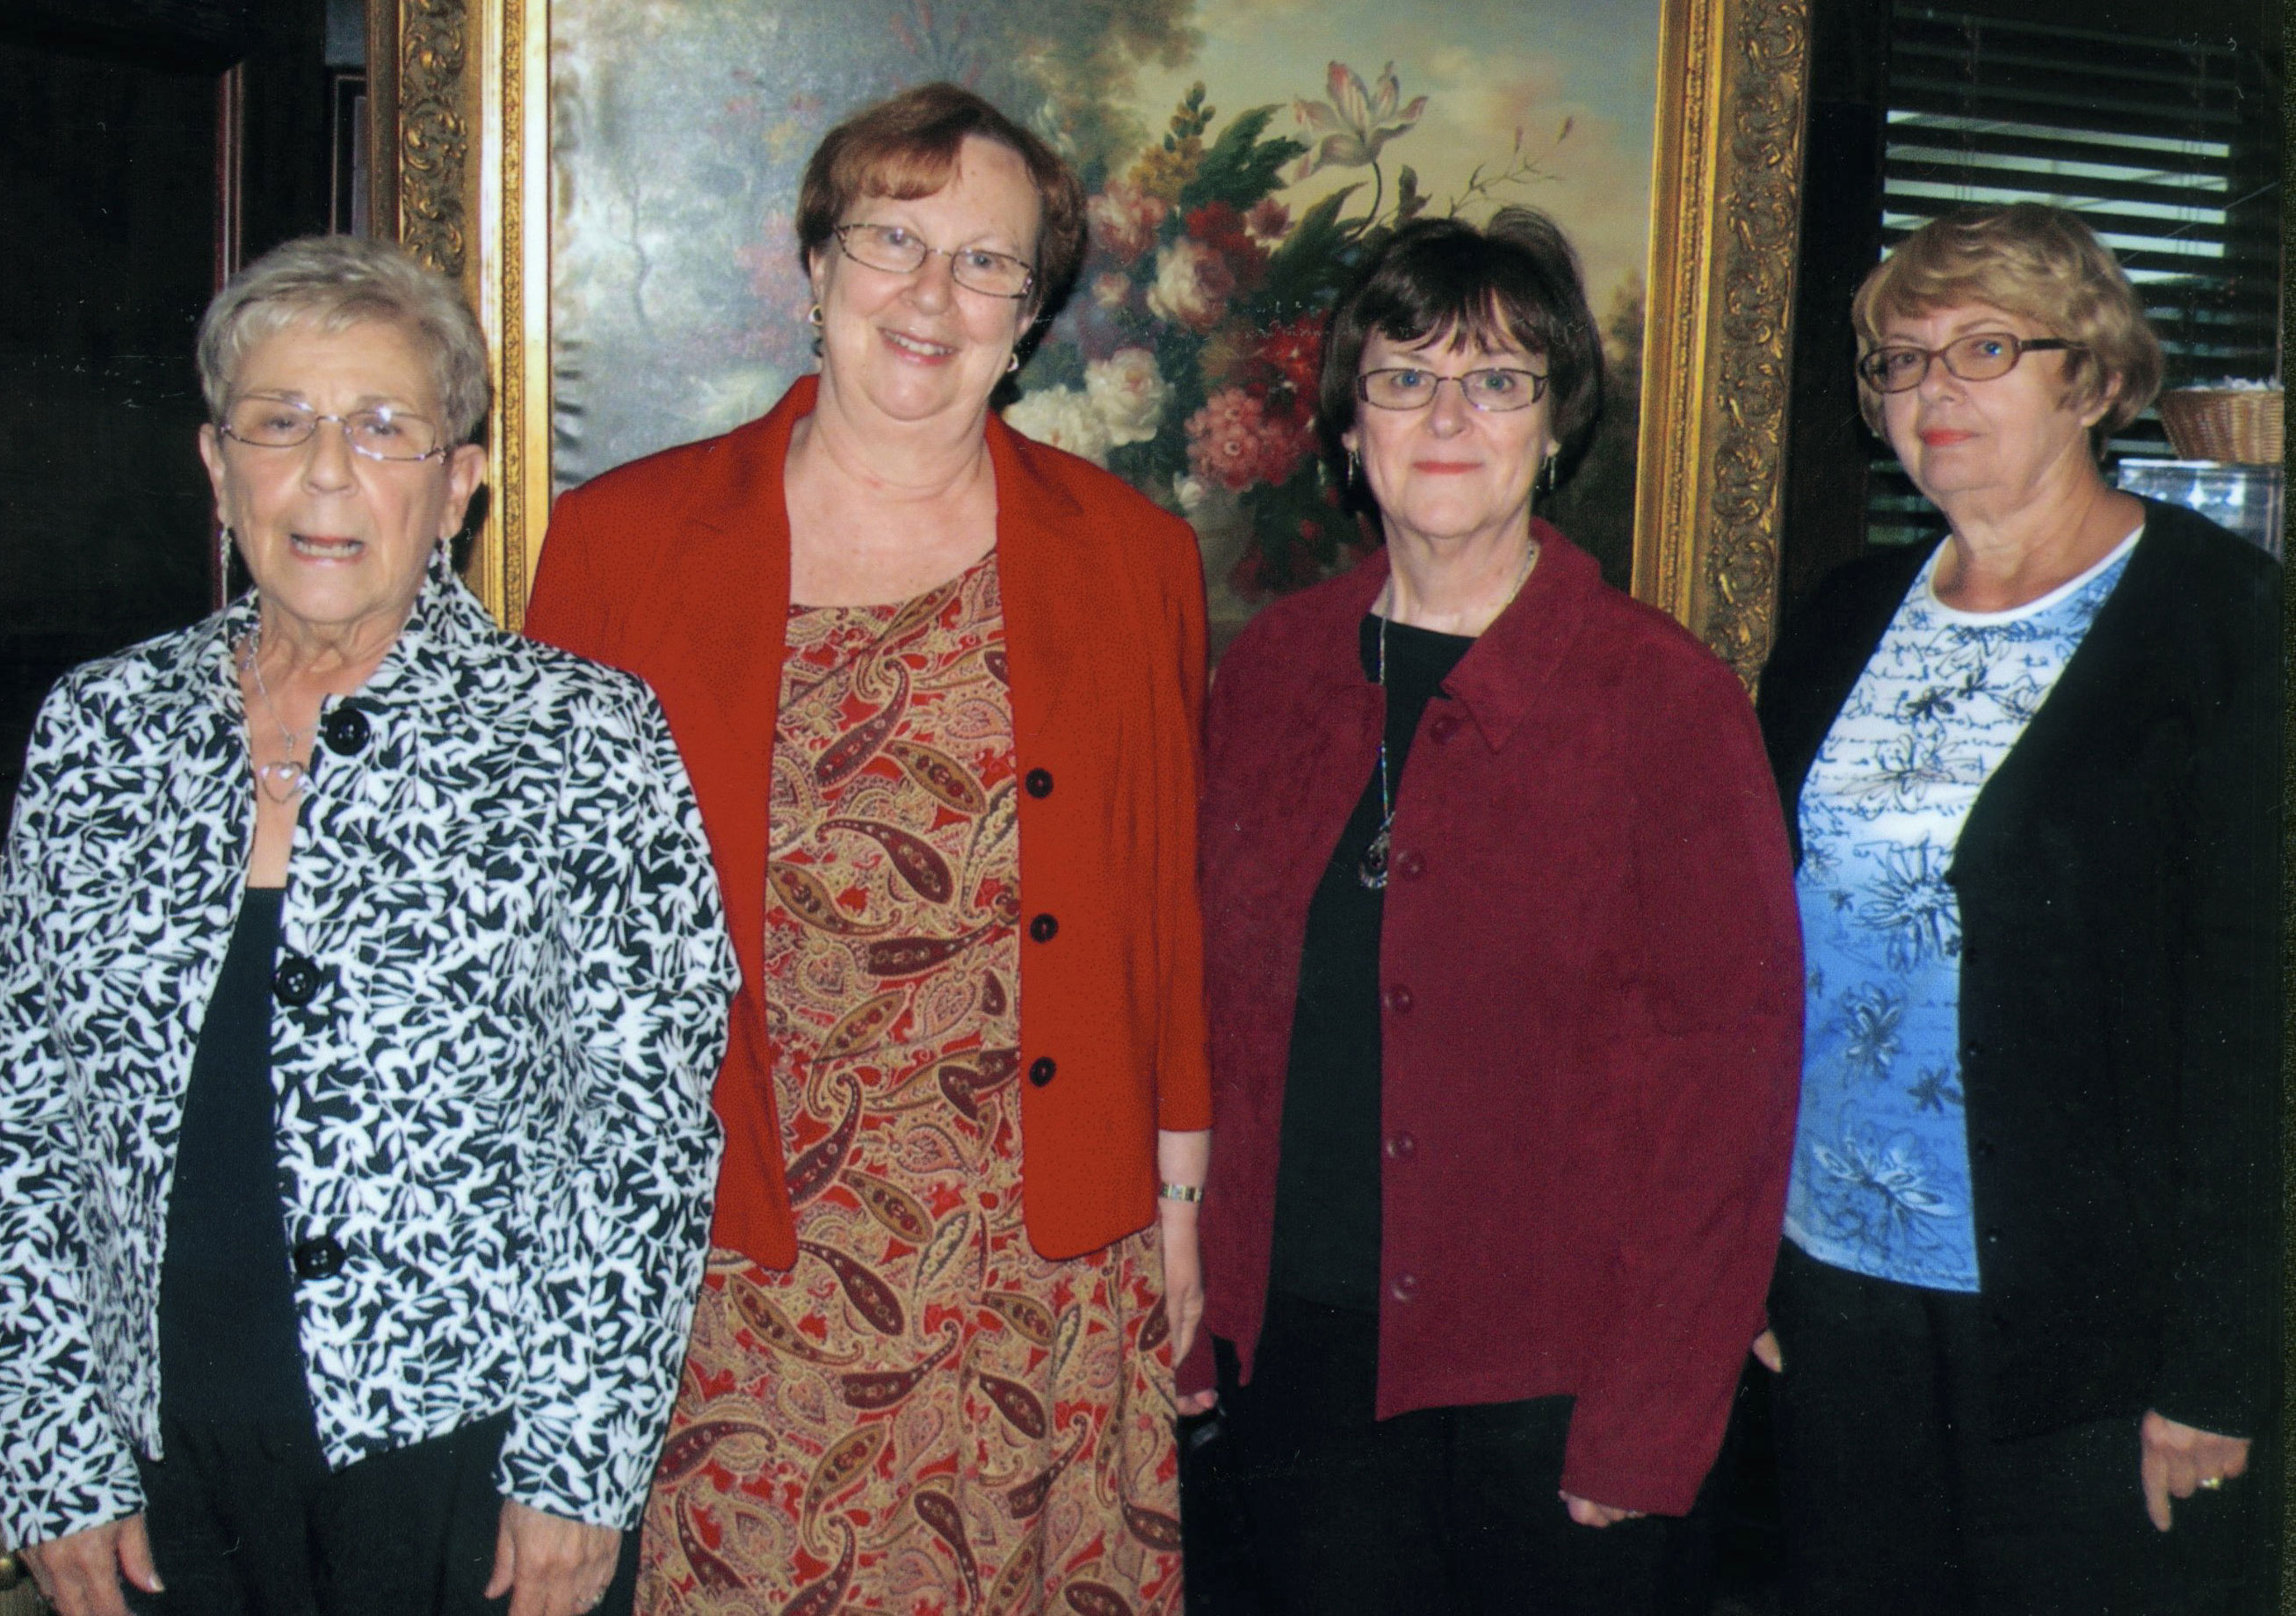 
Looking forward to greeting women who are interested in meeting people and making friends in new surroundings are officers of the Newcomers, from left, Mary Jane Stevens, treasurer; Kathleen Yap, vice president; Luanna Jacobs, president; and Regina Jenkins, newsletter. The club offers opportunities for women to participate in various social activities such as the Round Towners (which includes husbands), and birthday, needlework and movie groups. The next monthly luncheon meeting will be at 11:30 a.m. Oct. 27 at A La Cart in Canfield. The speaker will be Janet Loew, director of public relations for Mahoning County Library. For more information on the Newcomers, call 330-726-9620.